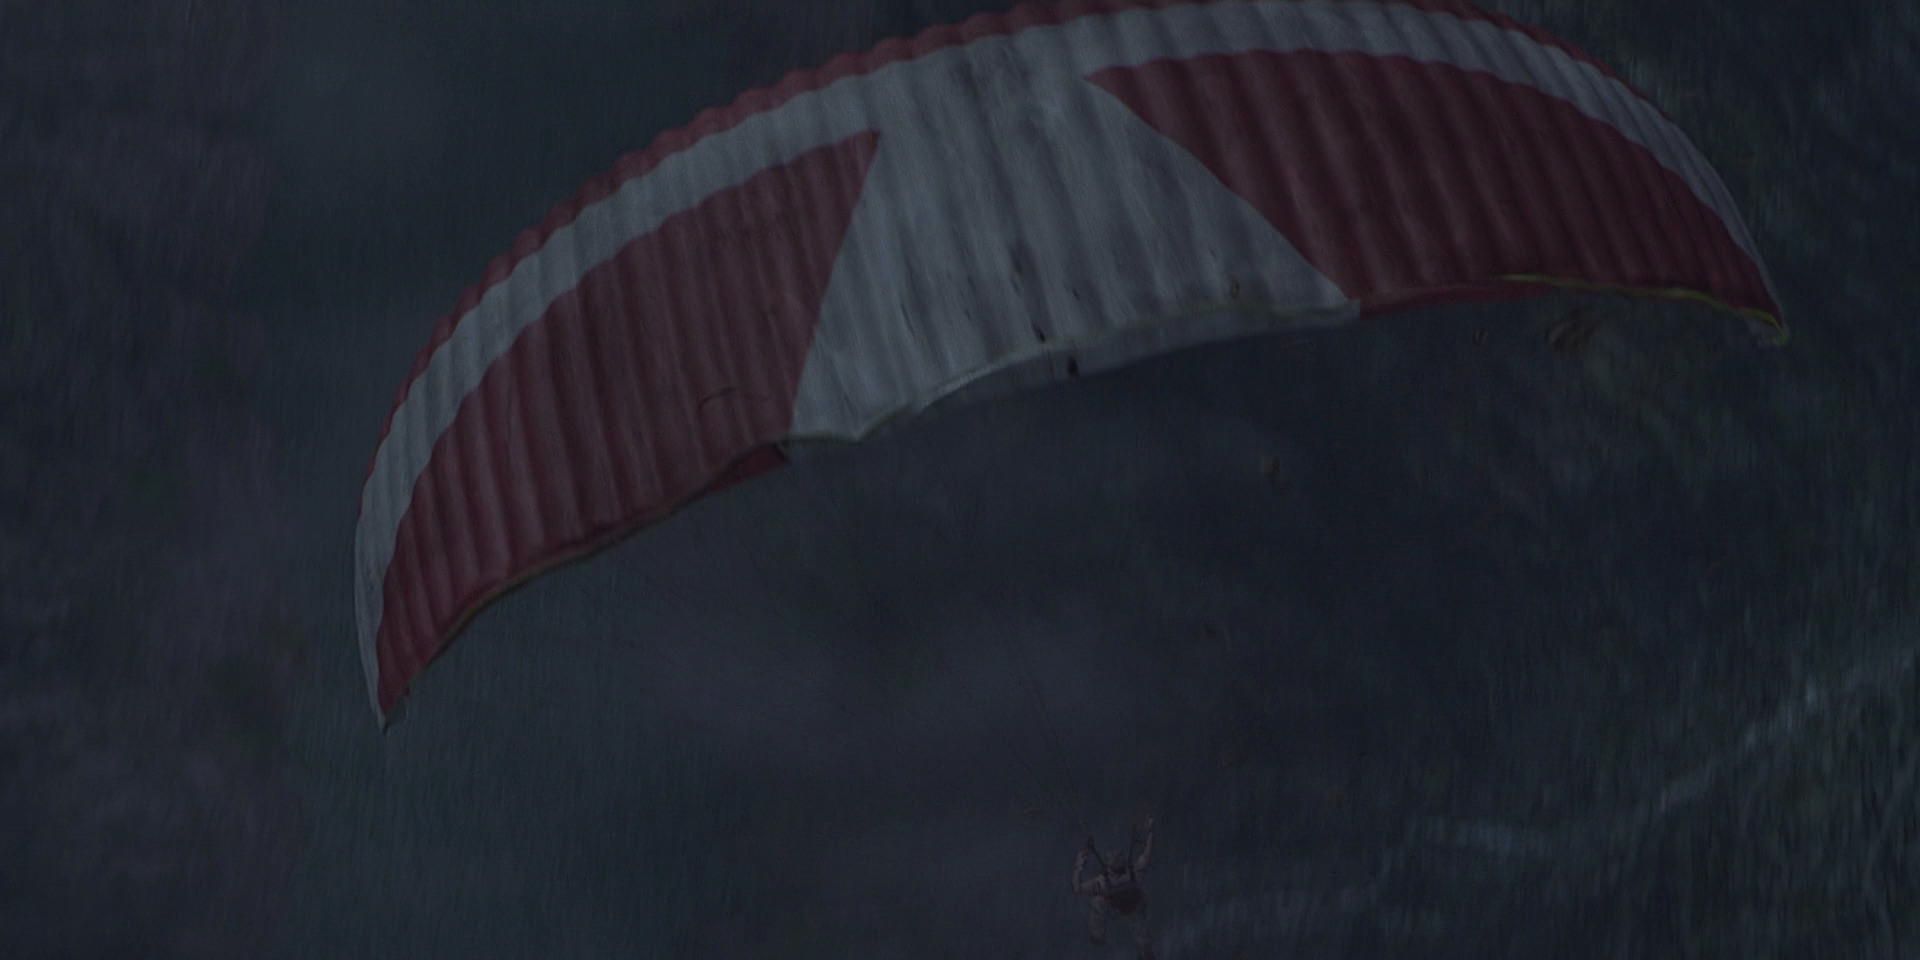 The parasail in Jurassic Park III